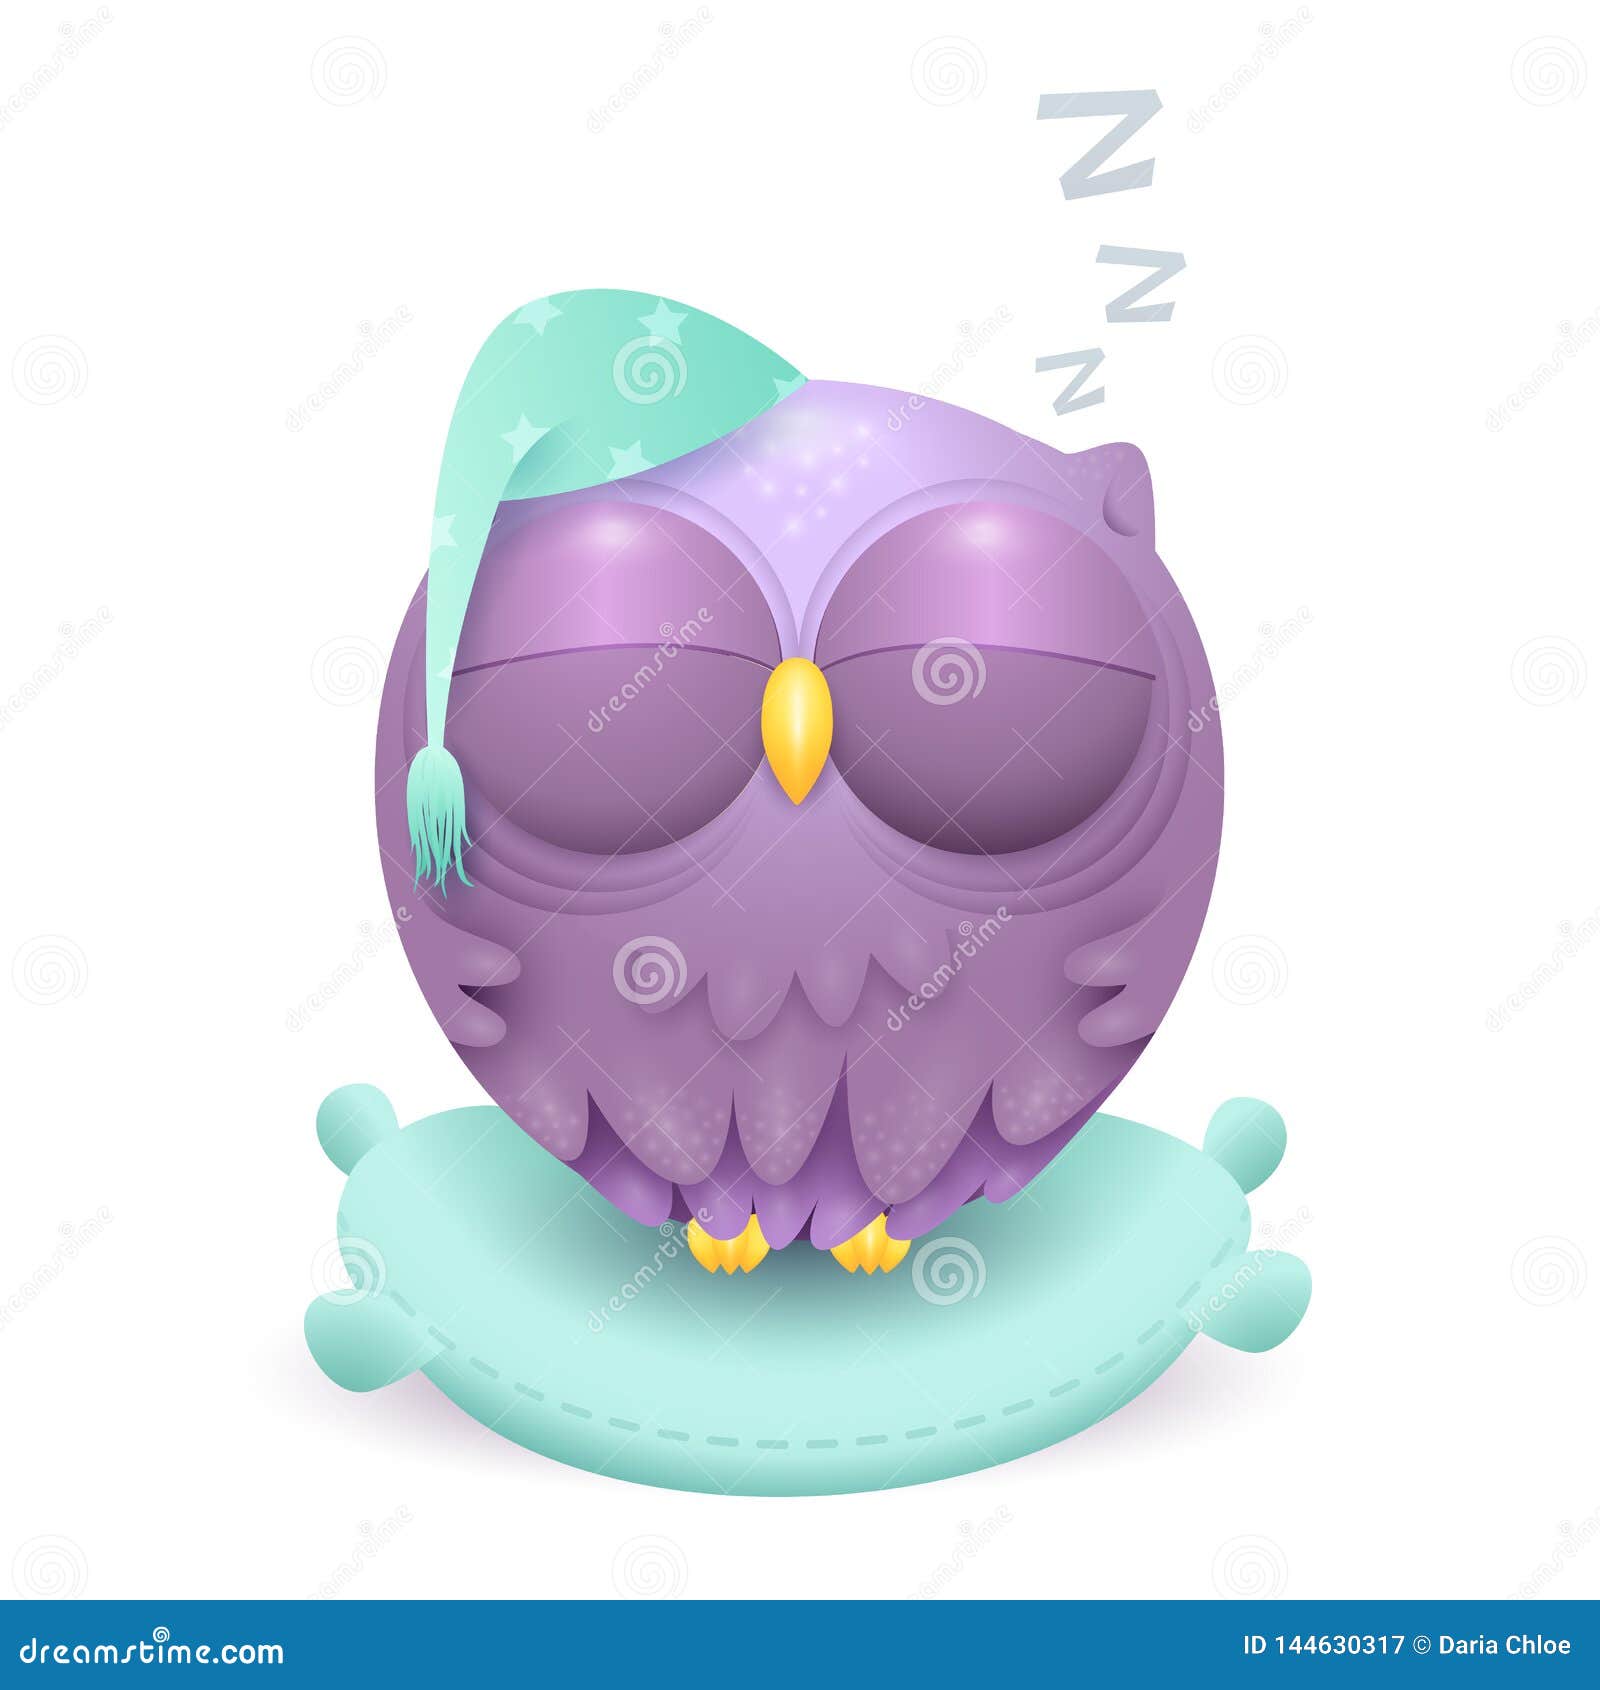 Cute Little Sleeping Owl Character on a Pillow Stock Illustration ...